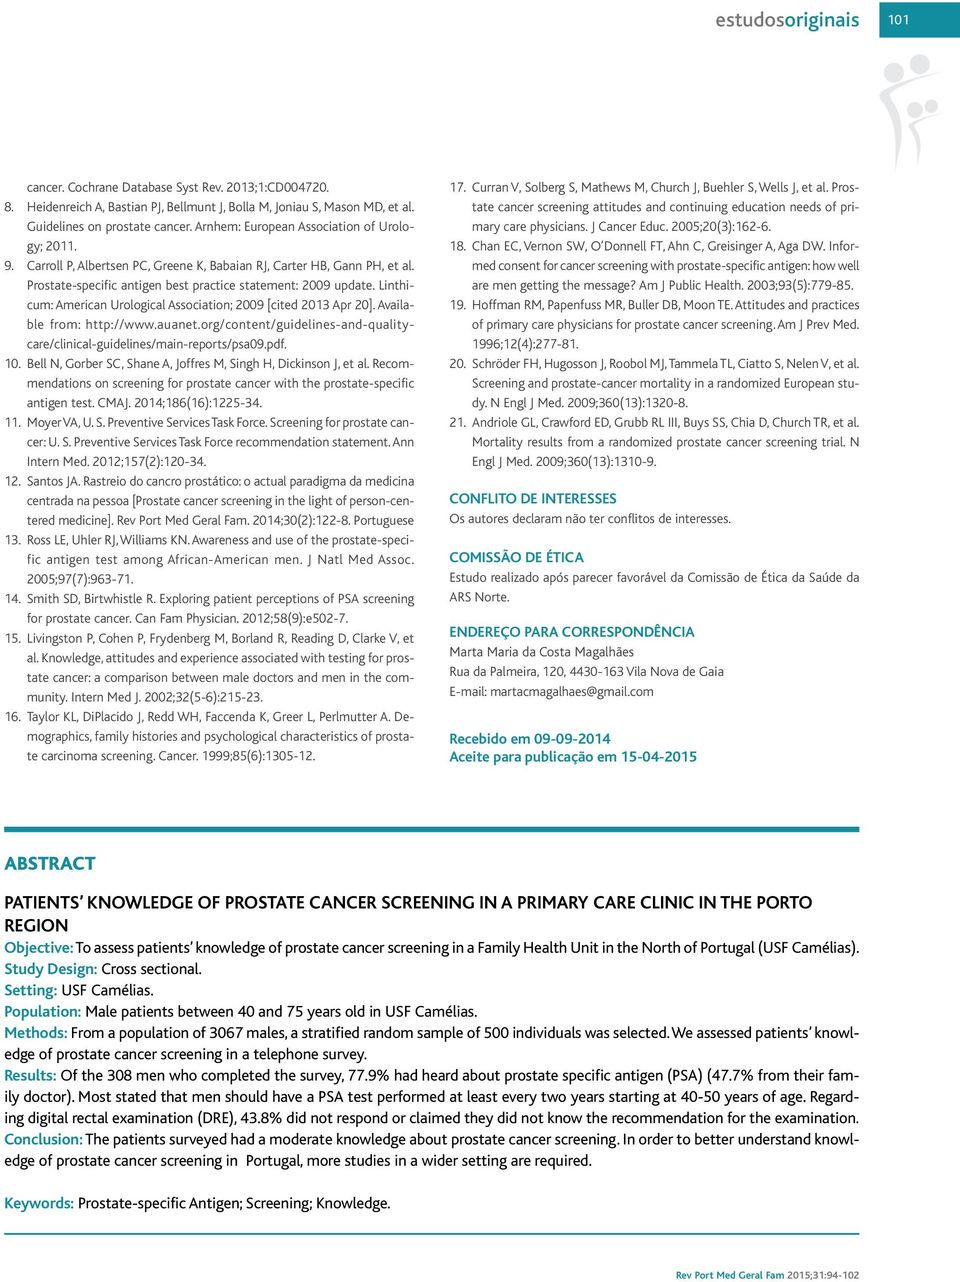 Linthicum: American Urological Association; 2009 [cited 2013 Apr 20]. Available from: http://www.auanet.org/content/guidelines-and-qualitycare/clinical-guidelines/main-reports/psa09.pdf. 10.